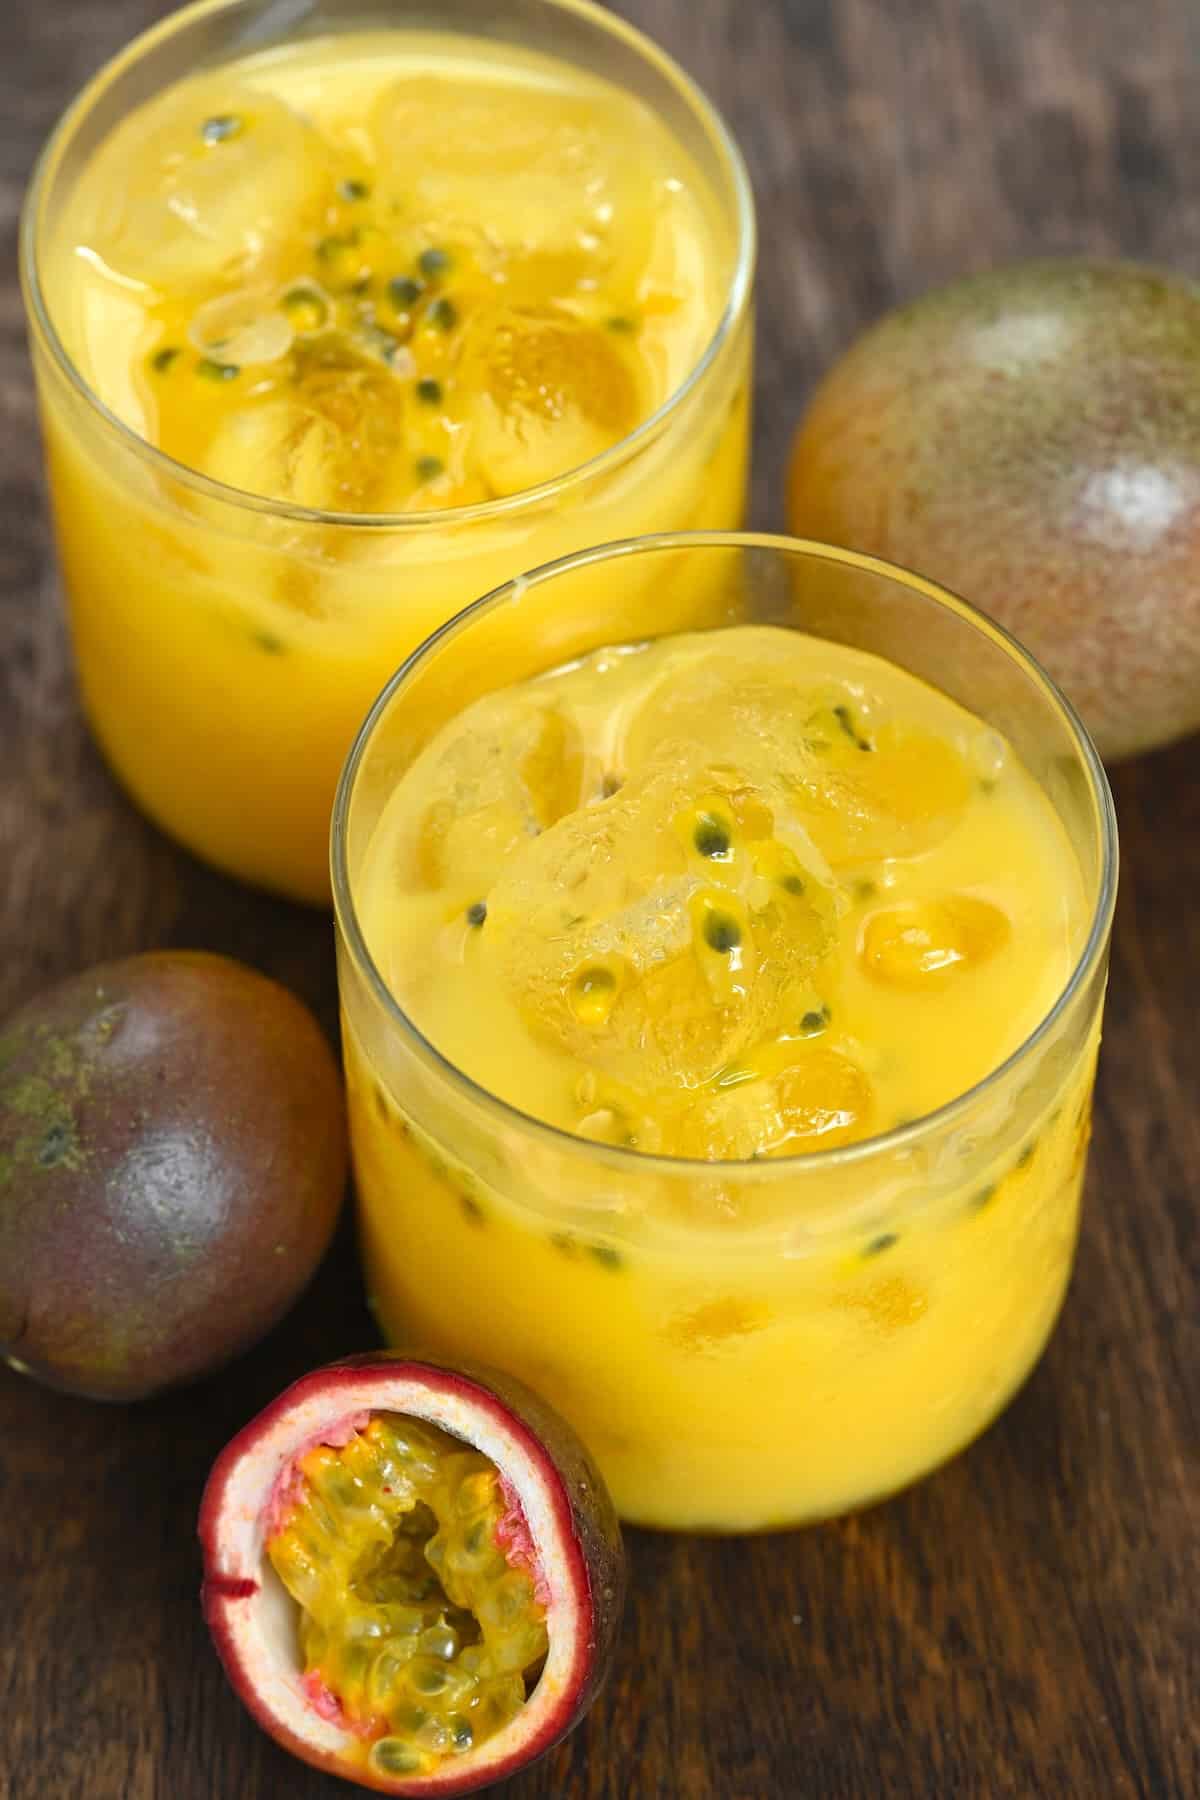 How To Make Homemade Passion Fruit Juice Recipe + Video